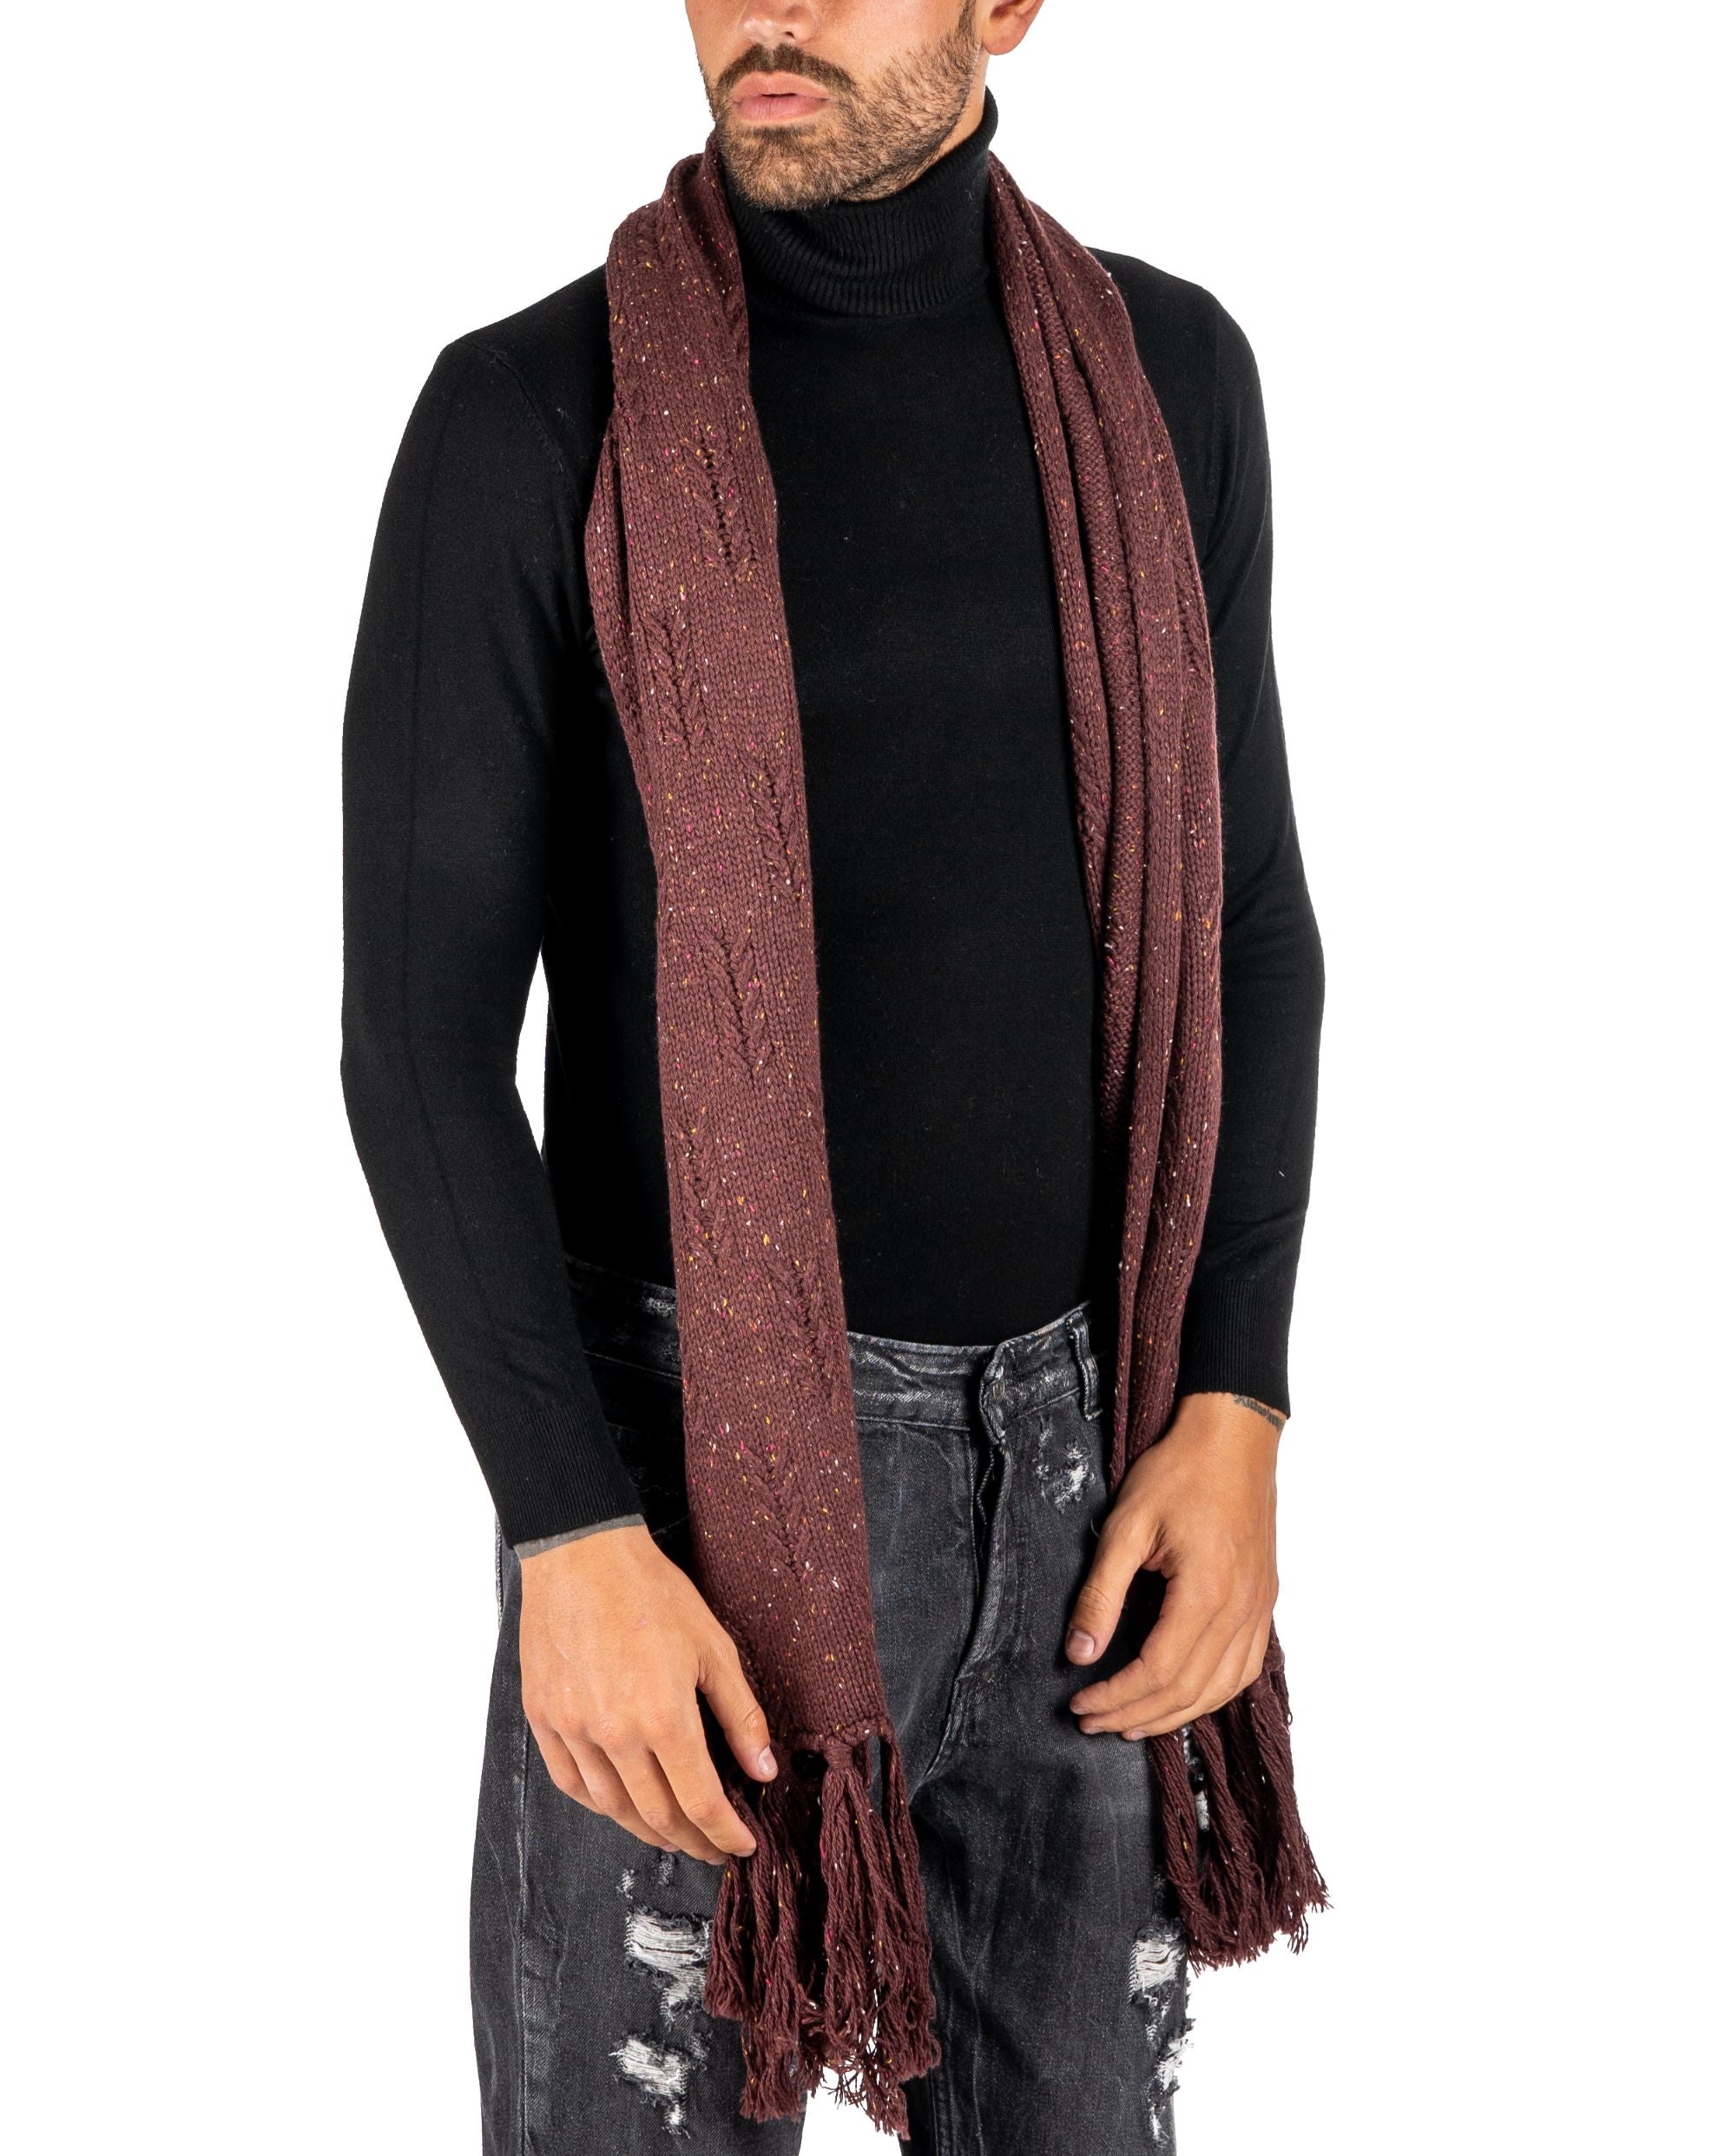 HEAVY BURGUNDY SCARF WITH MULTICOLORED MICRO PATTERN FRINGES